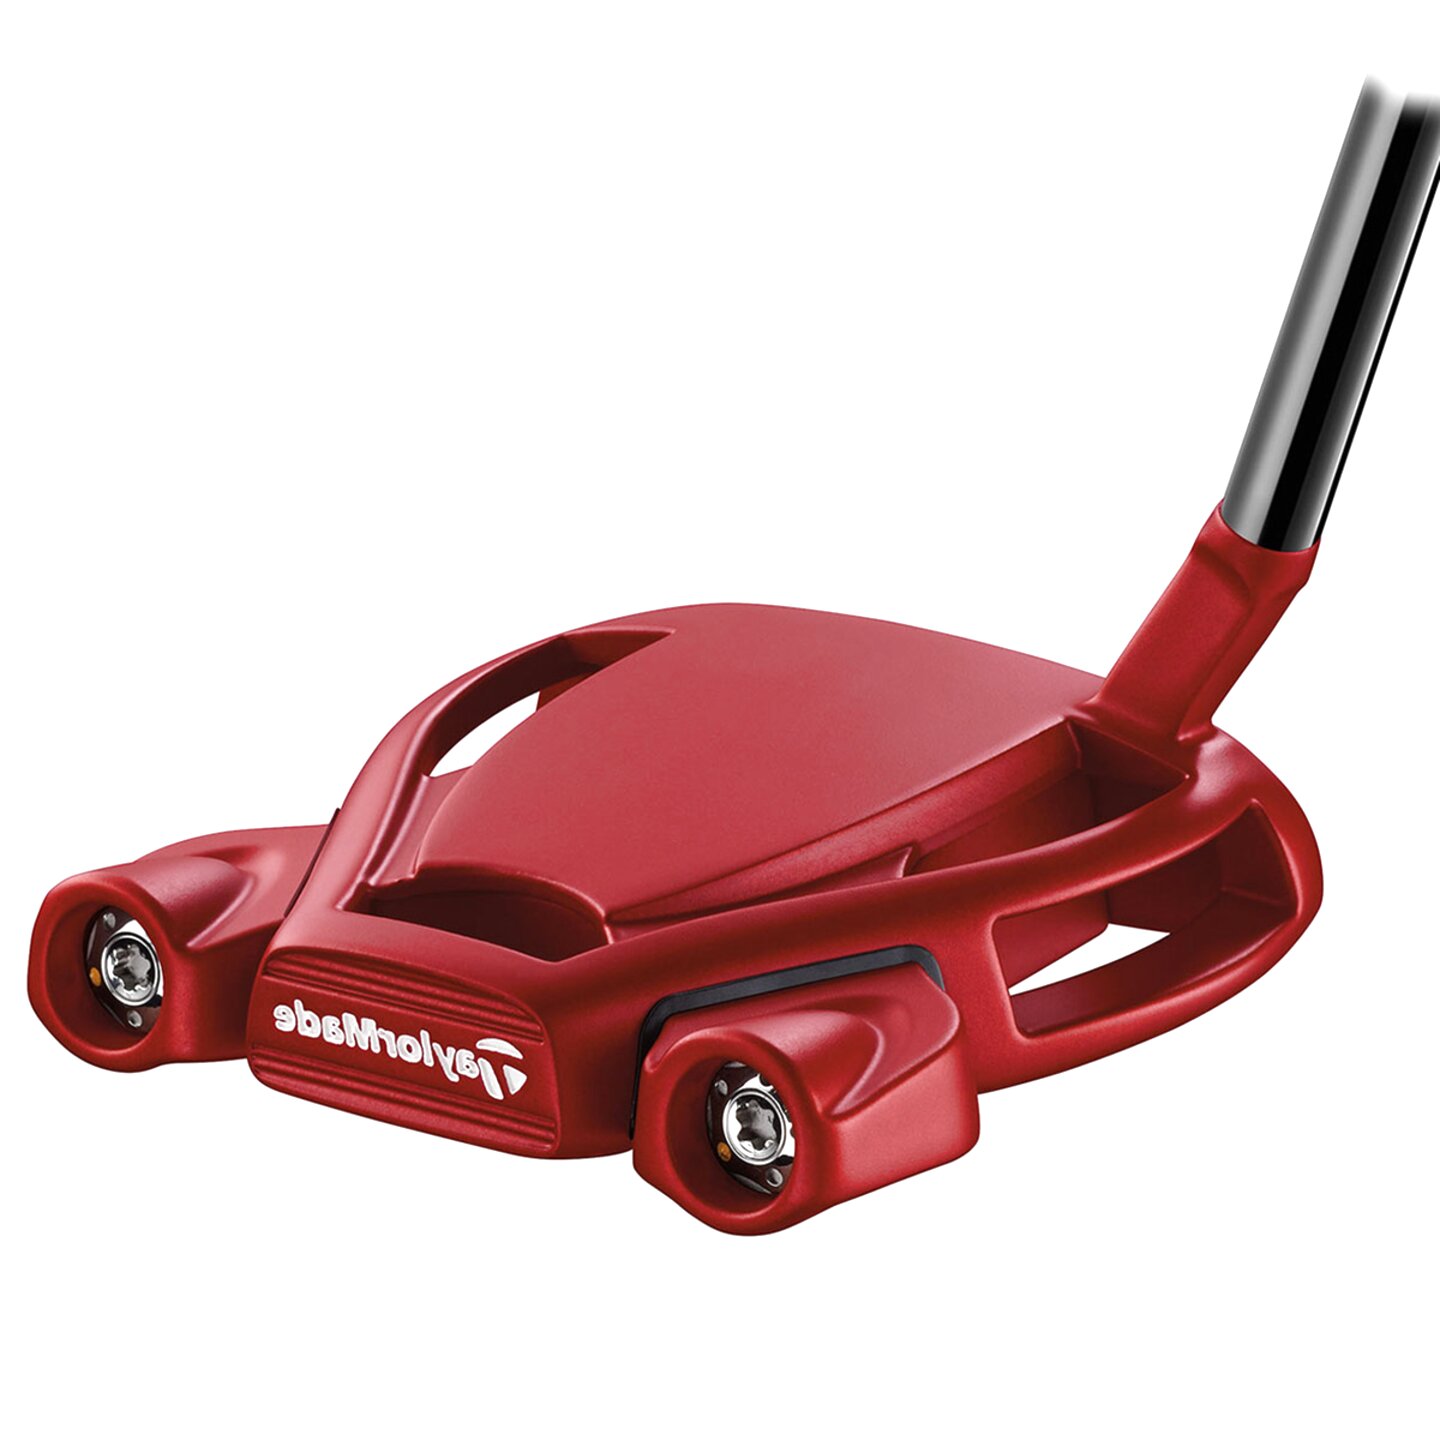 Spider Putter for sale in UK | 54 used Spider Putters